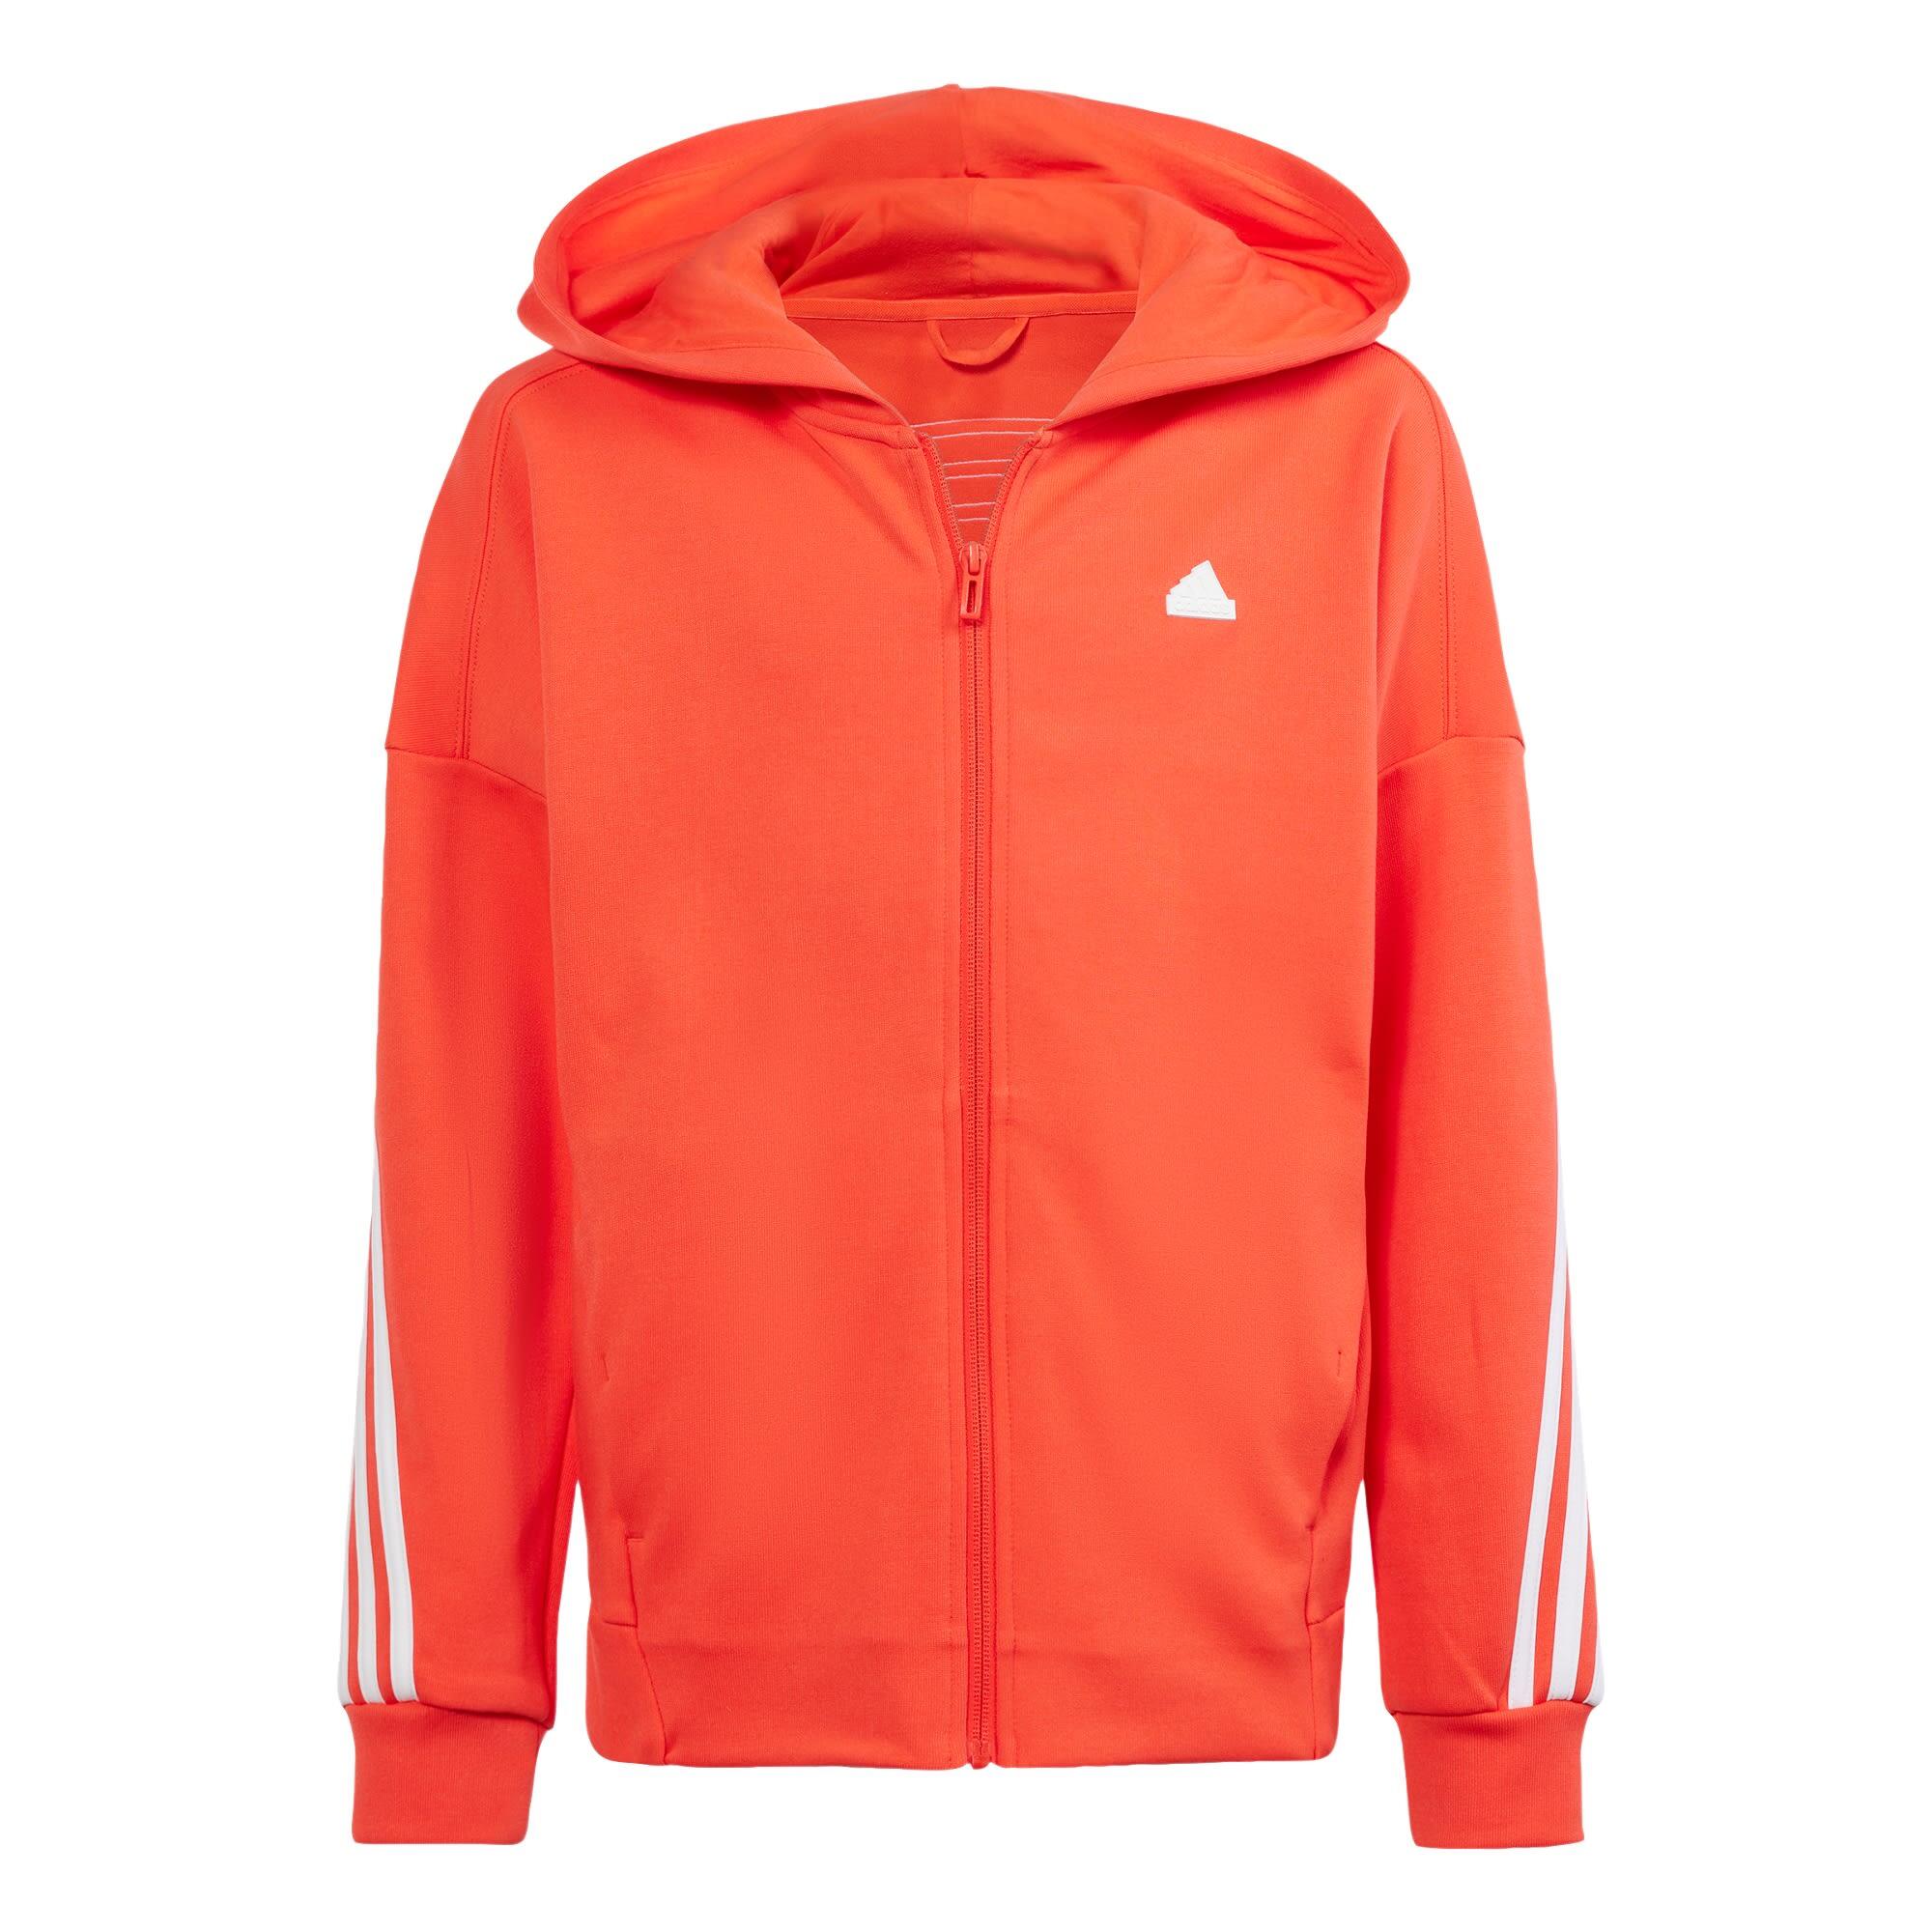 ADIDAS Future Icons 3-Stripes Full-Zip Hooded Track Top